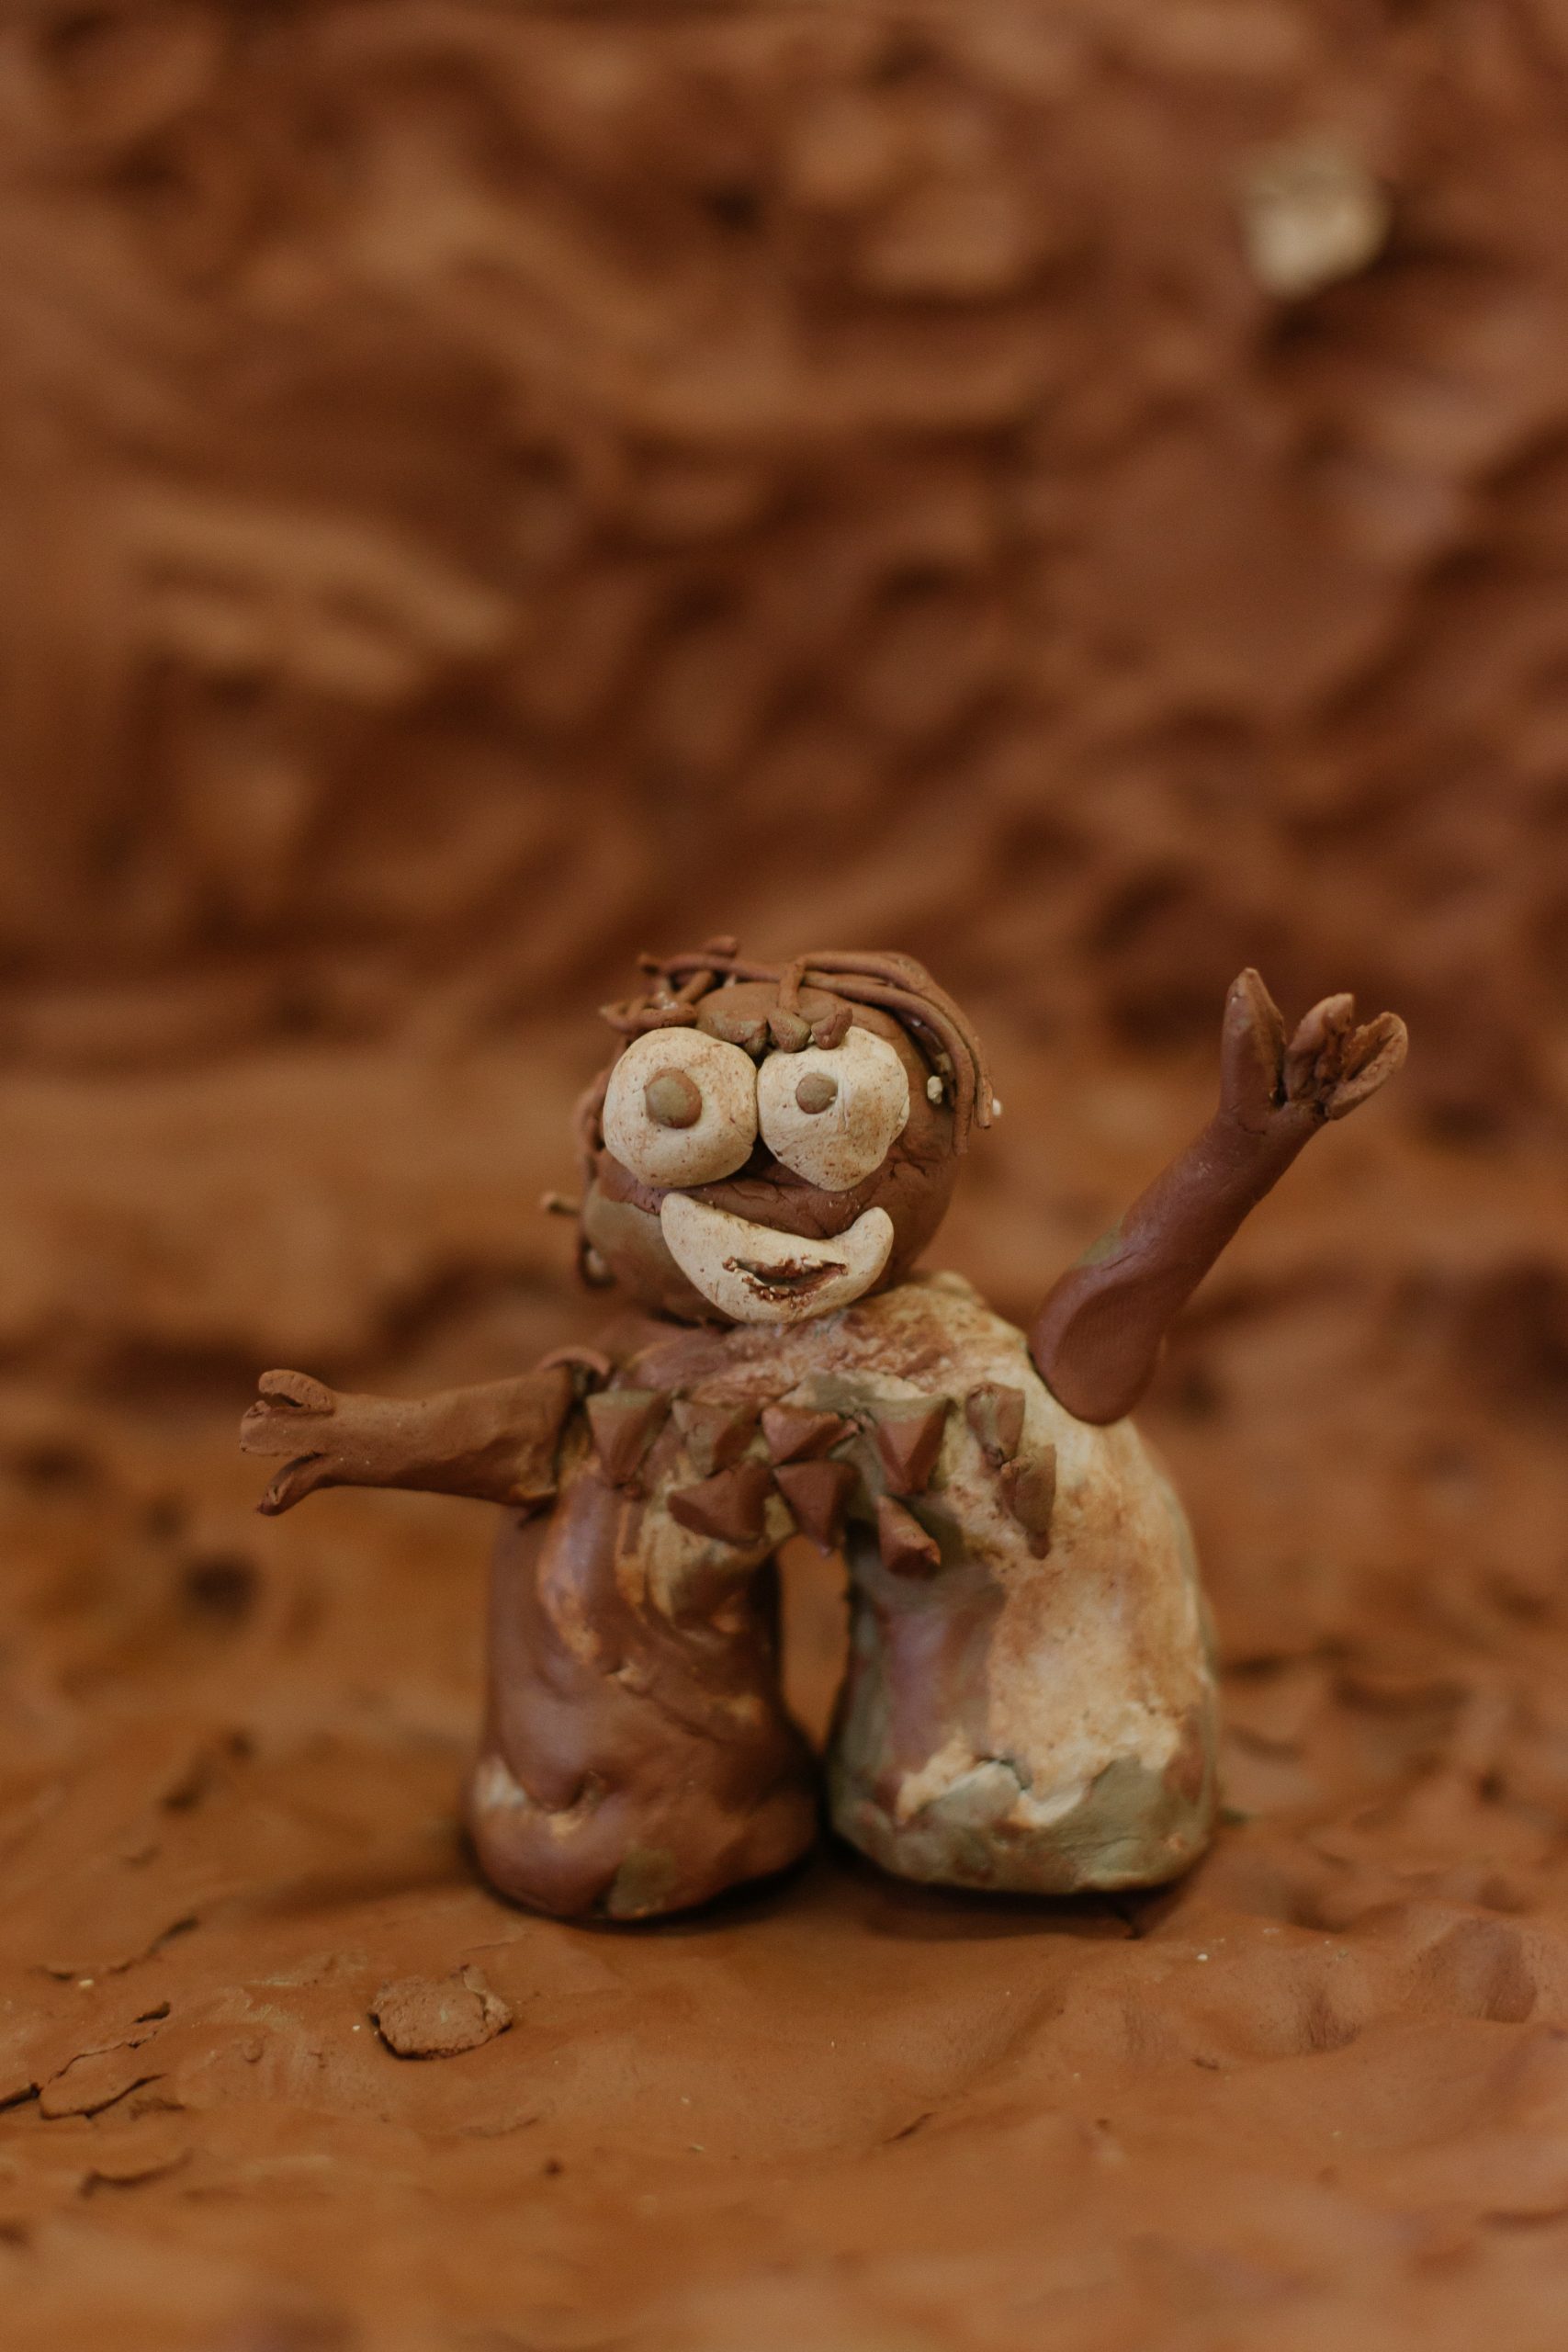 A smiling and waving brown clay figurine set in a brown clay diorama.